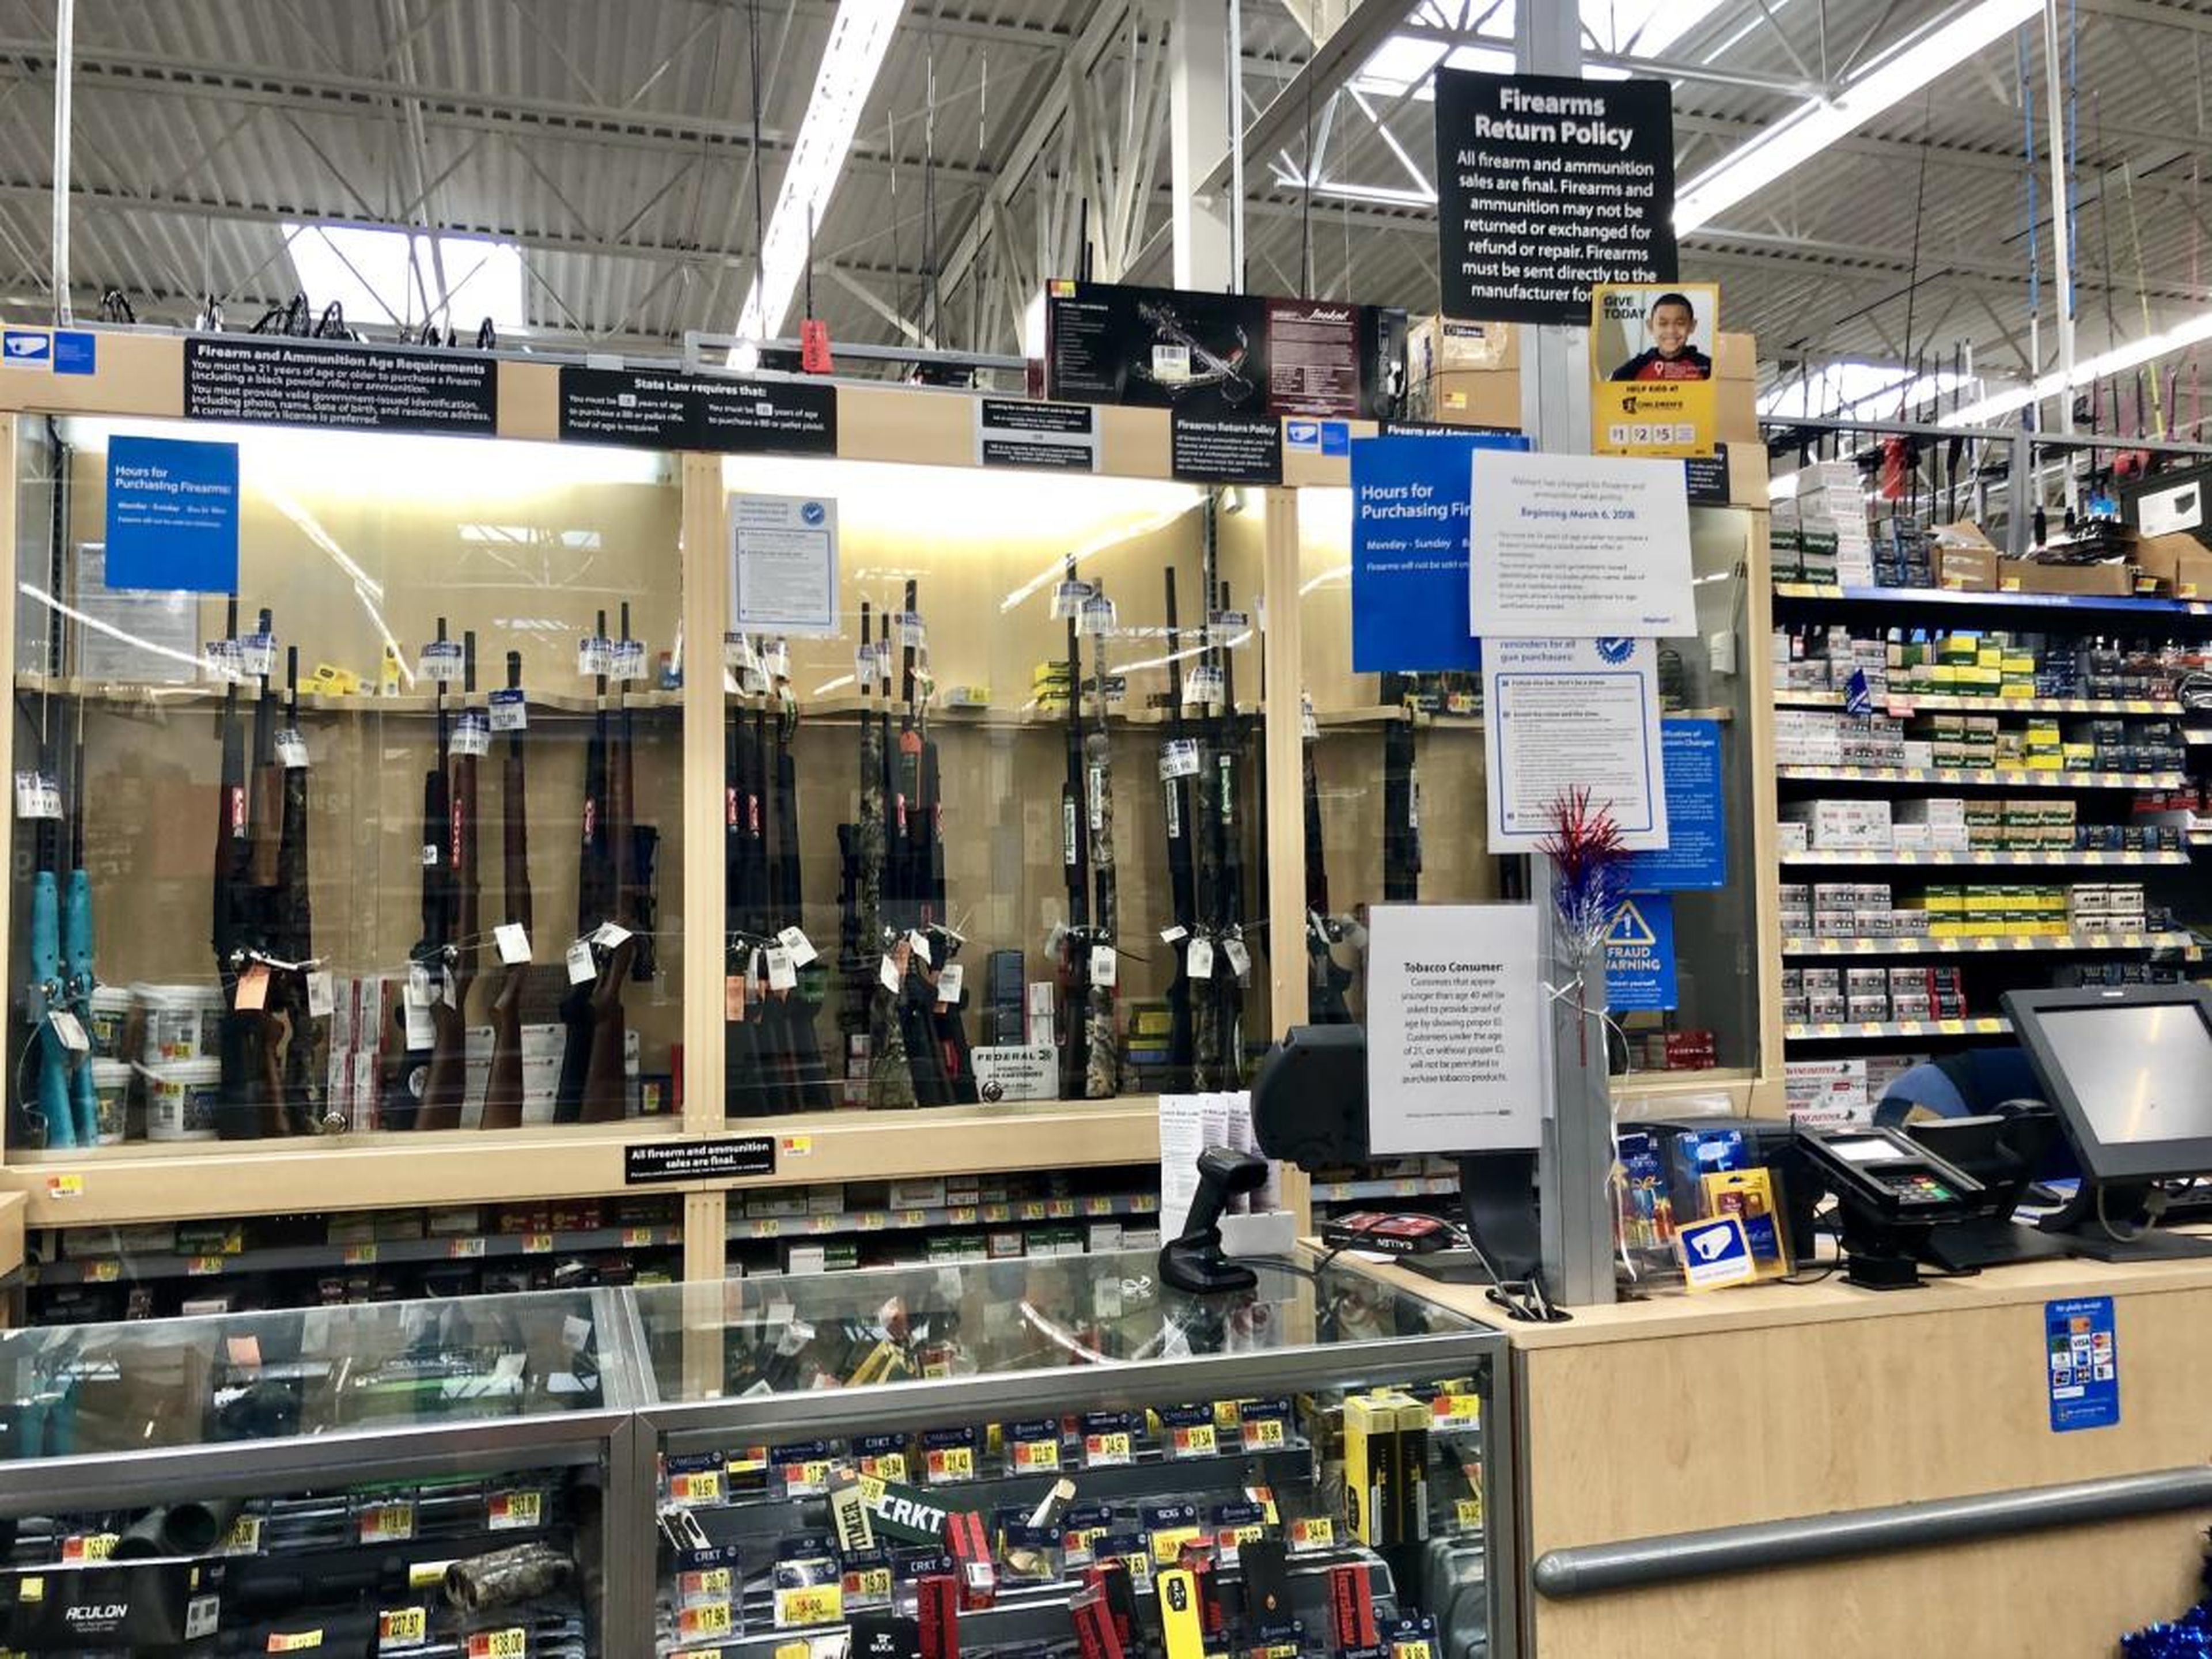 I told an employee behind the counter that I wanted to buy a gun. They called for a manager.